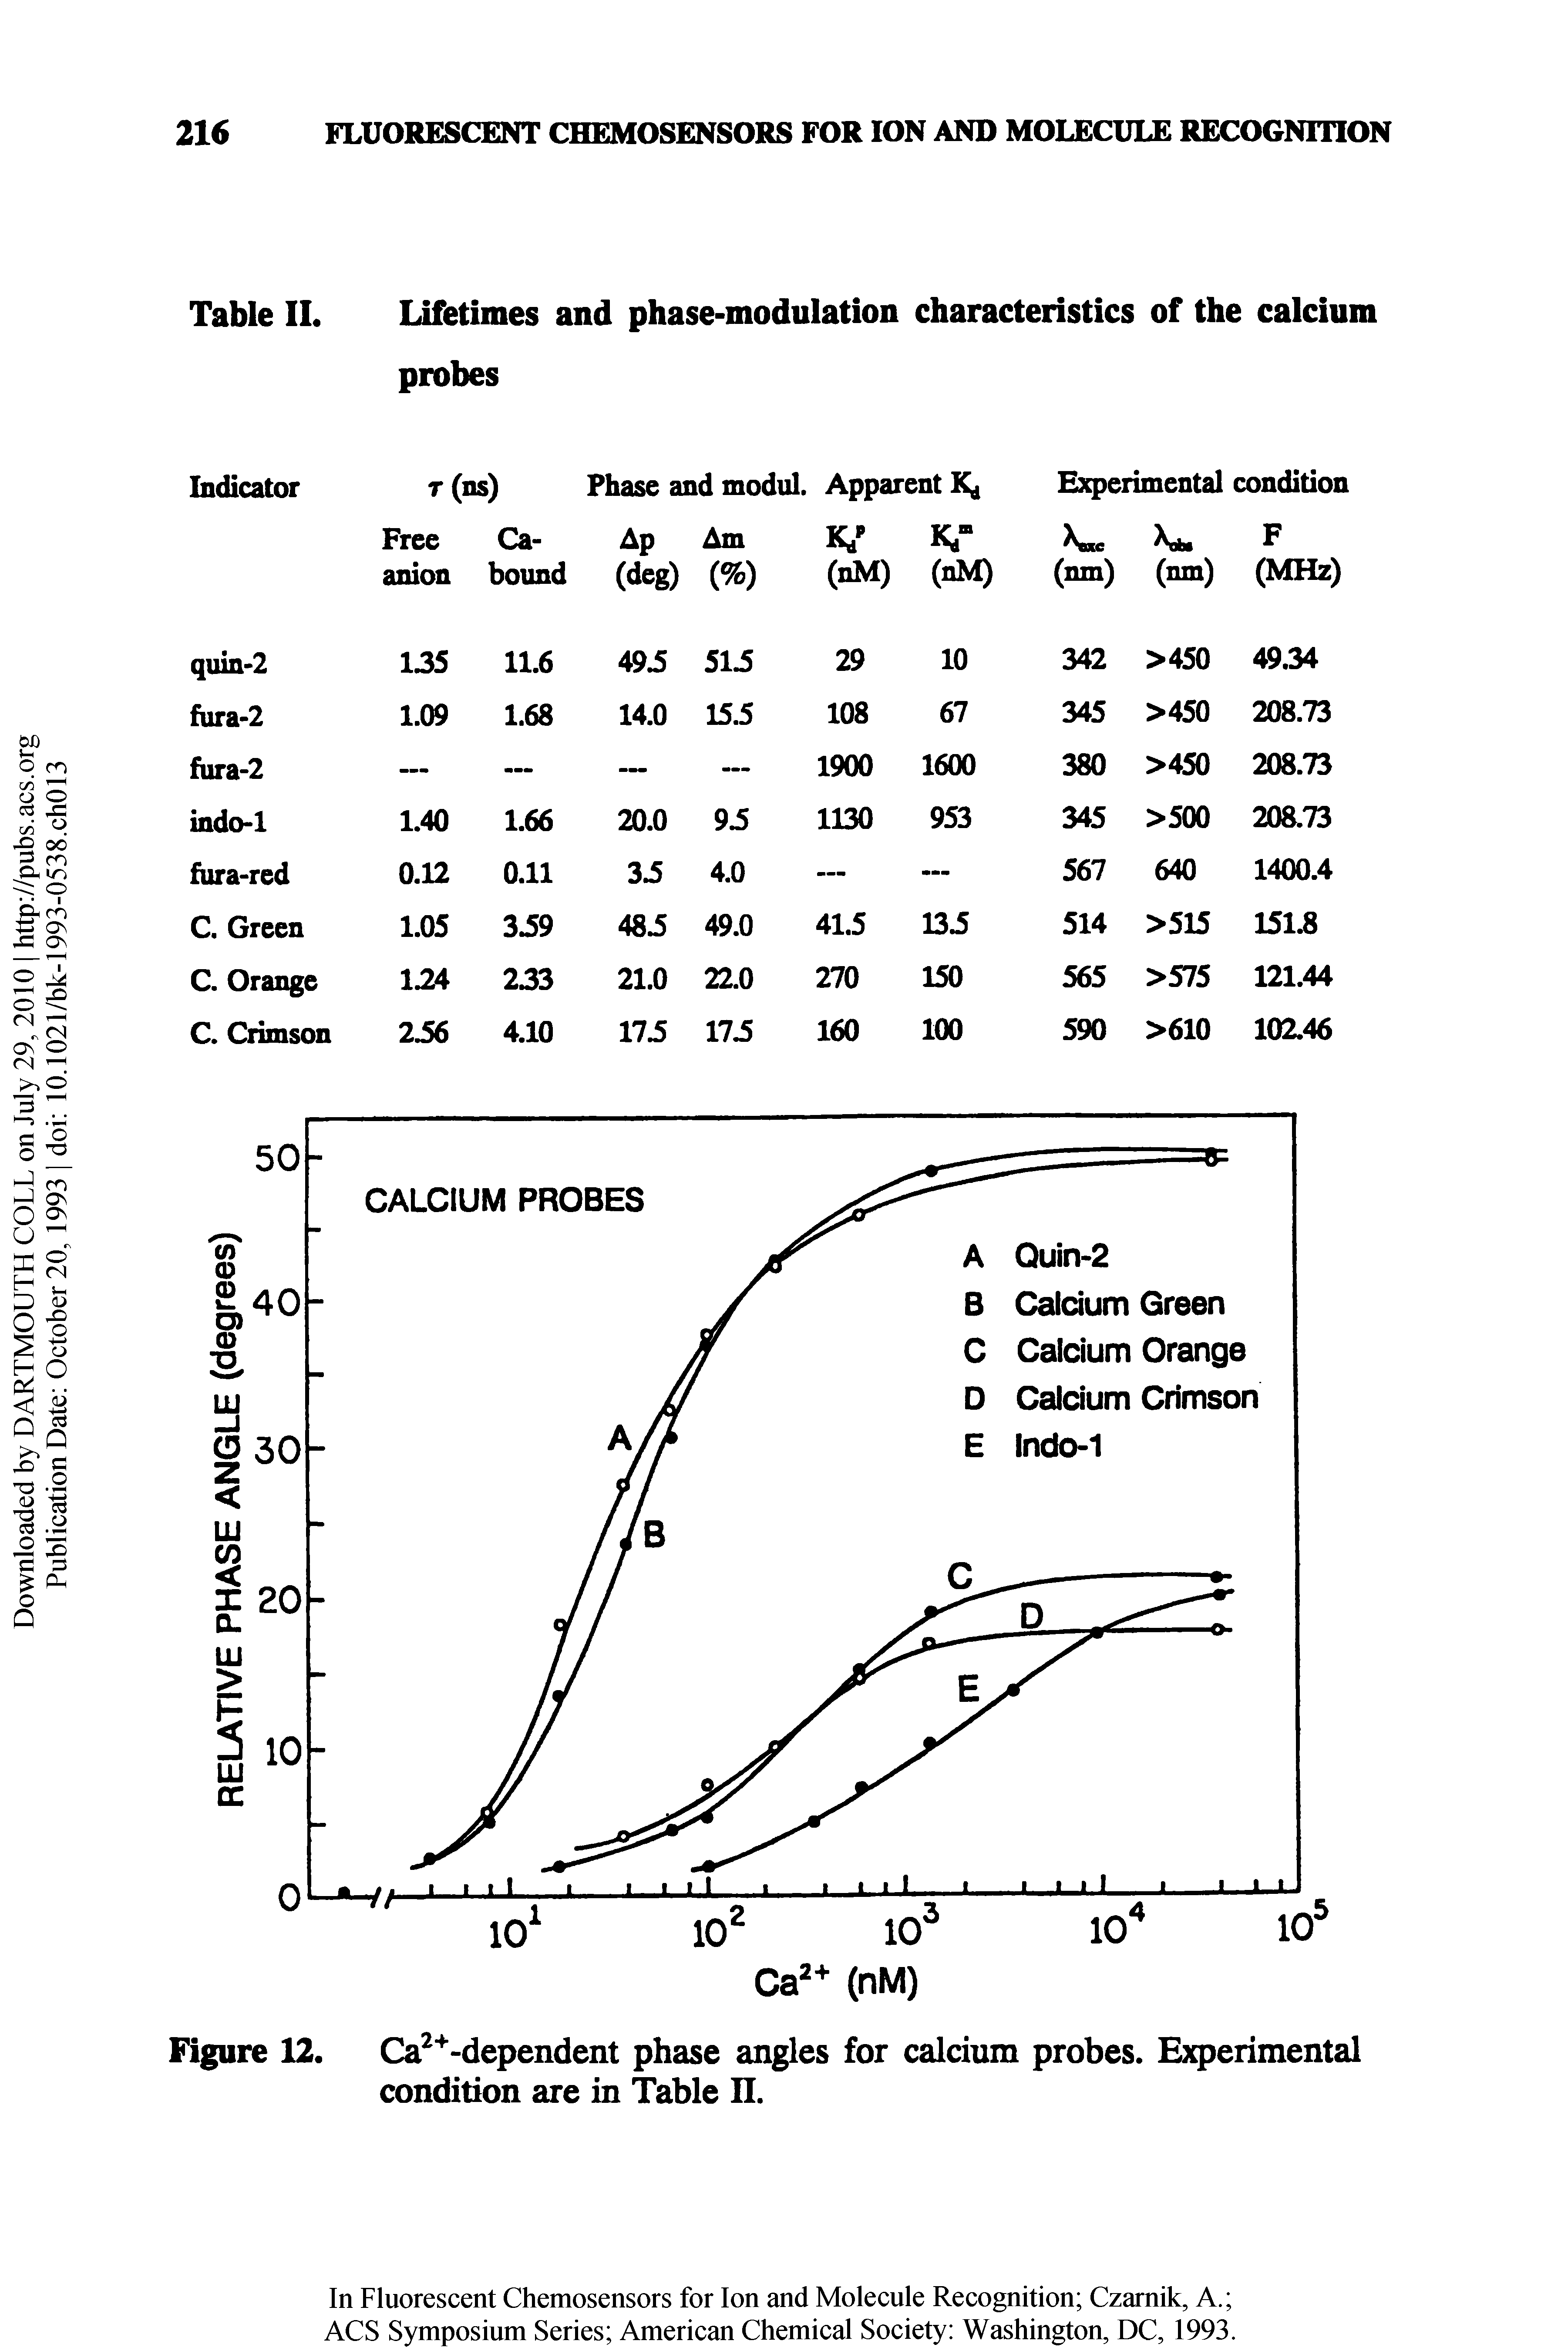 Table II. Lifetimes and phase-modulation characteristics of the calcium probes...